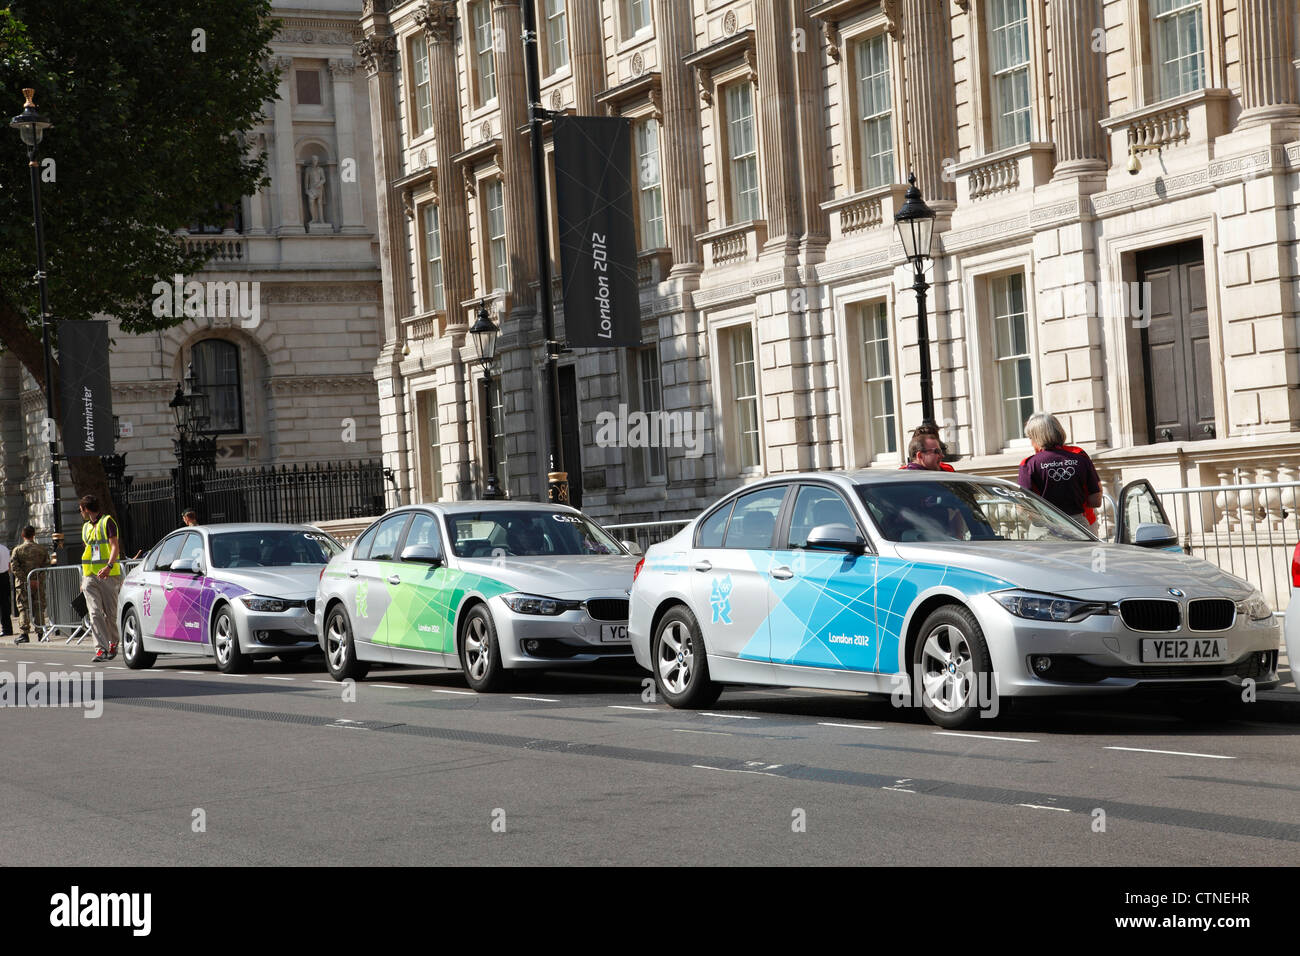 London 2012 official Olympic BMW cars on Whitehall, Westminster, London, England, U.K. Stock Photo